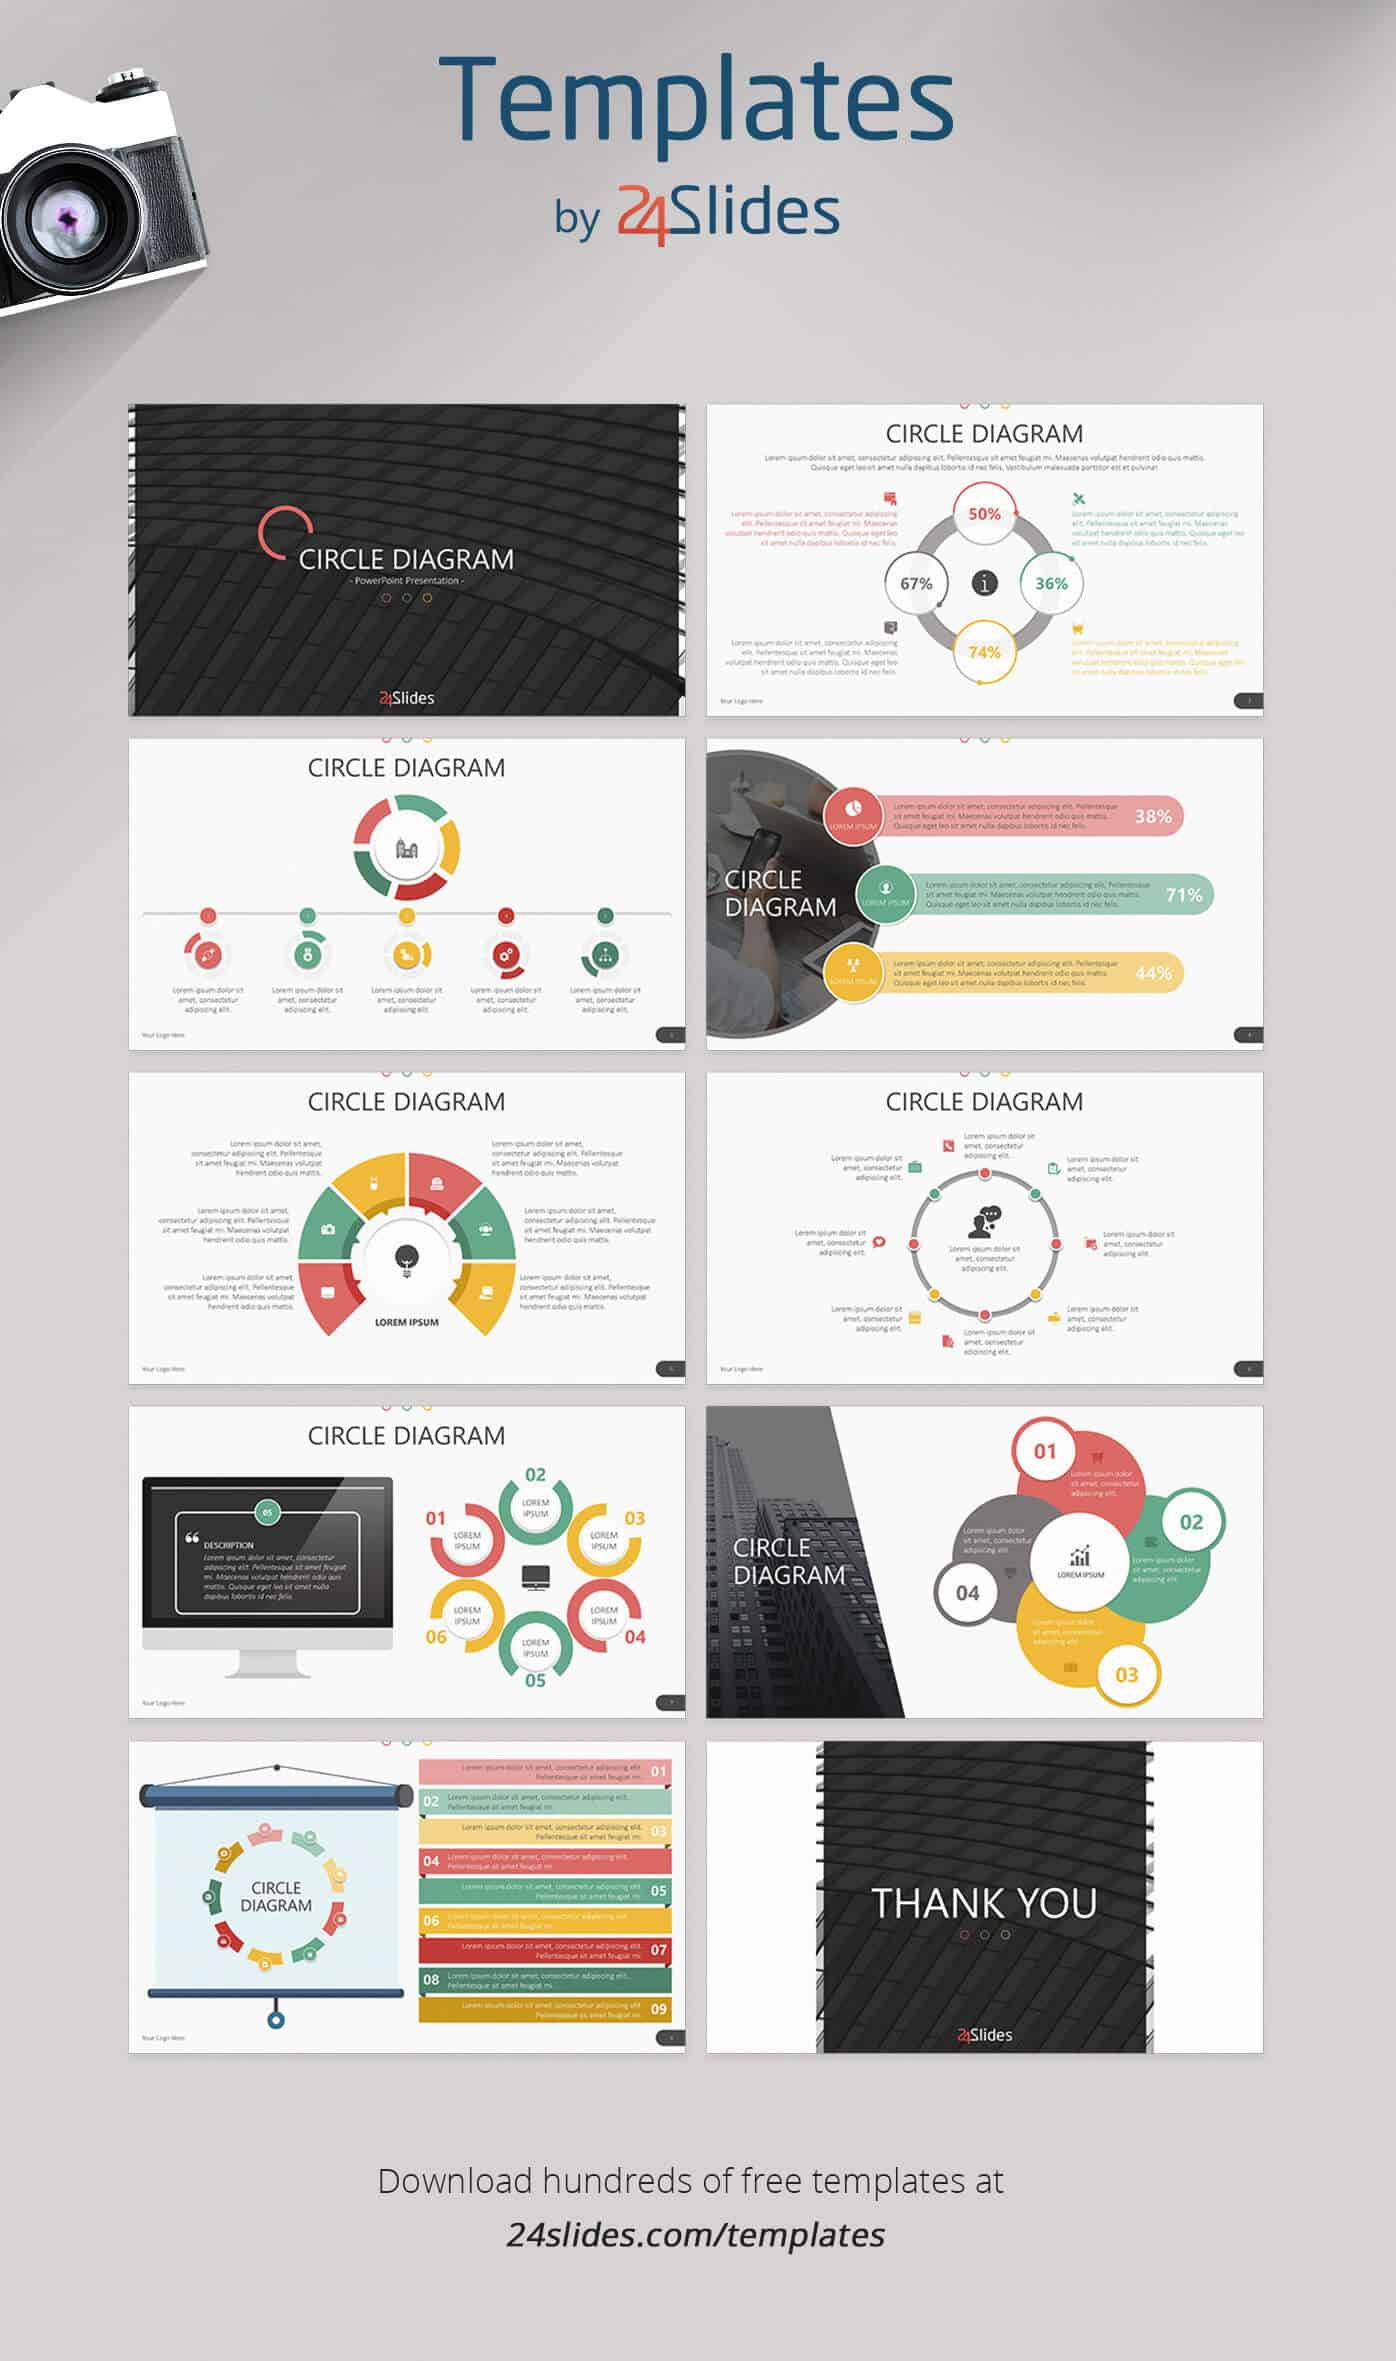 15 Fun And Colorful Free Powerpoint Templates | Present Better Inside Fun Powerpoint Templates Free Download